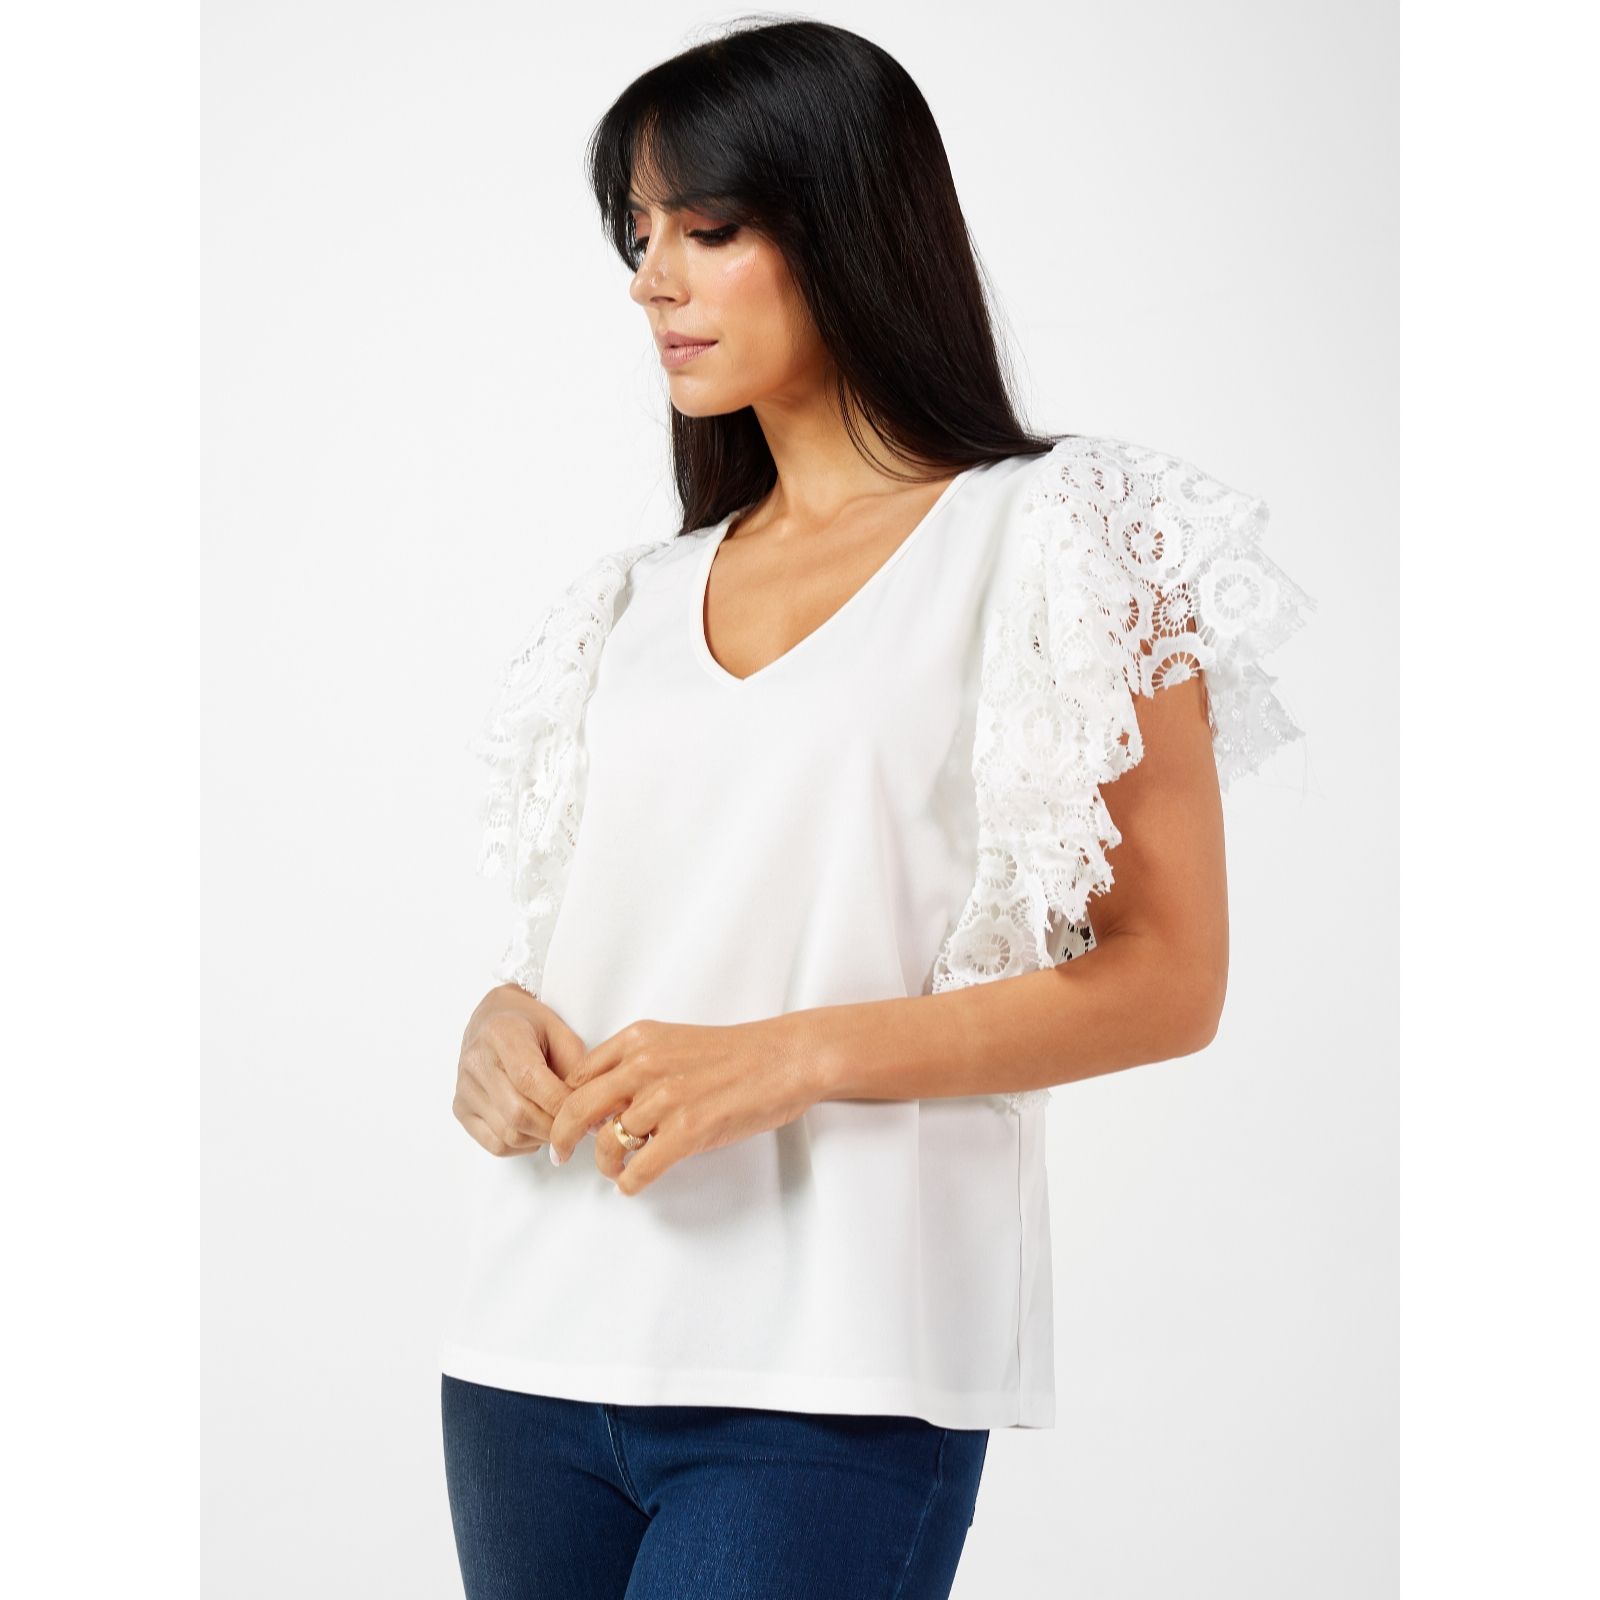 Malissa J V-Neck Top with Frill Sleeve - QVC UK